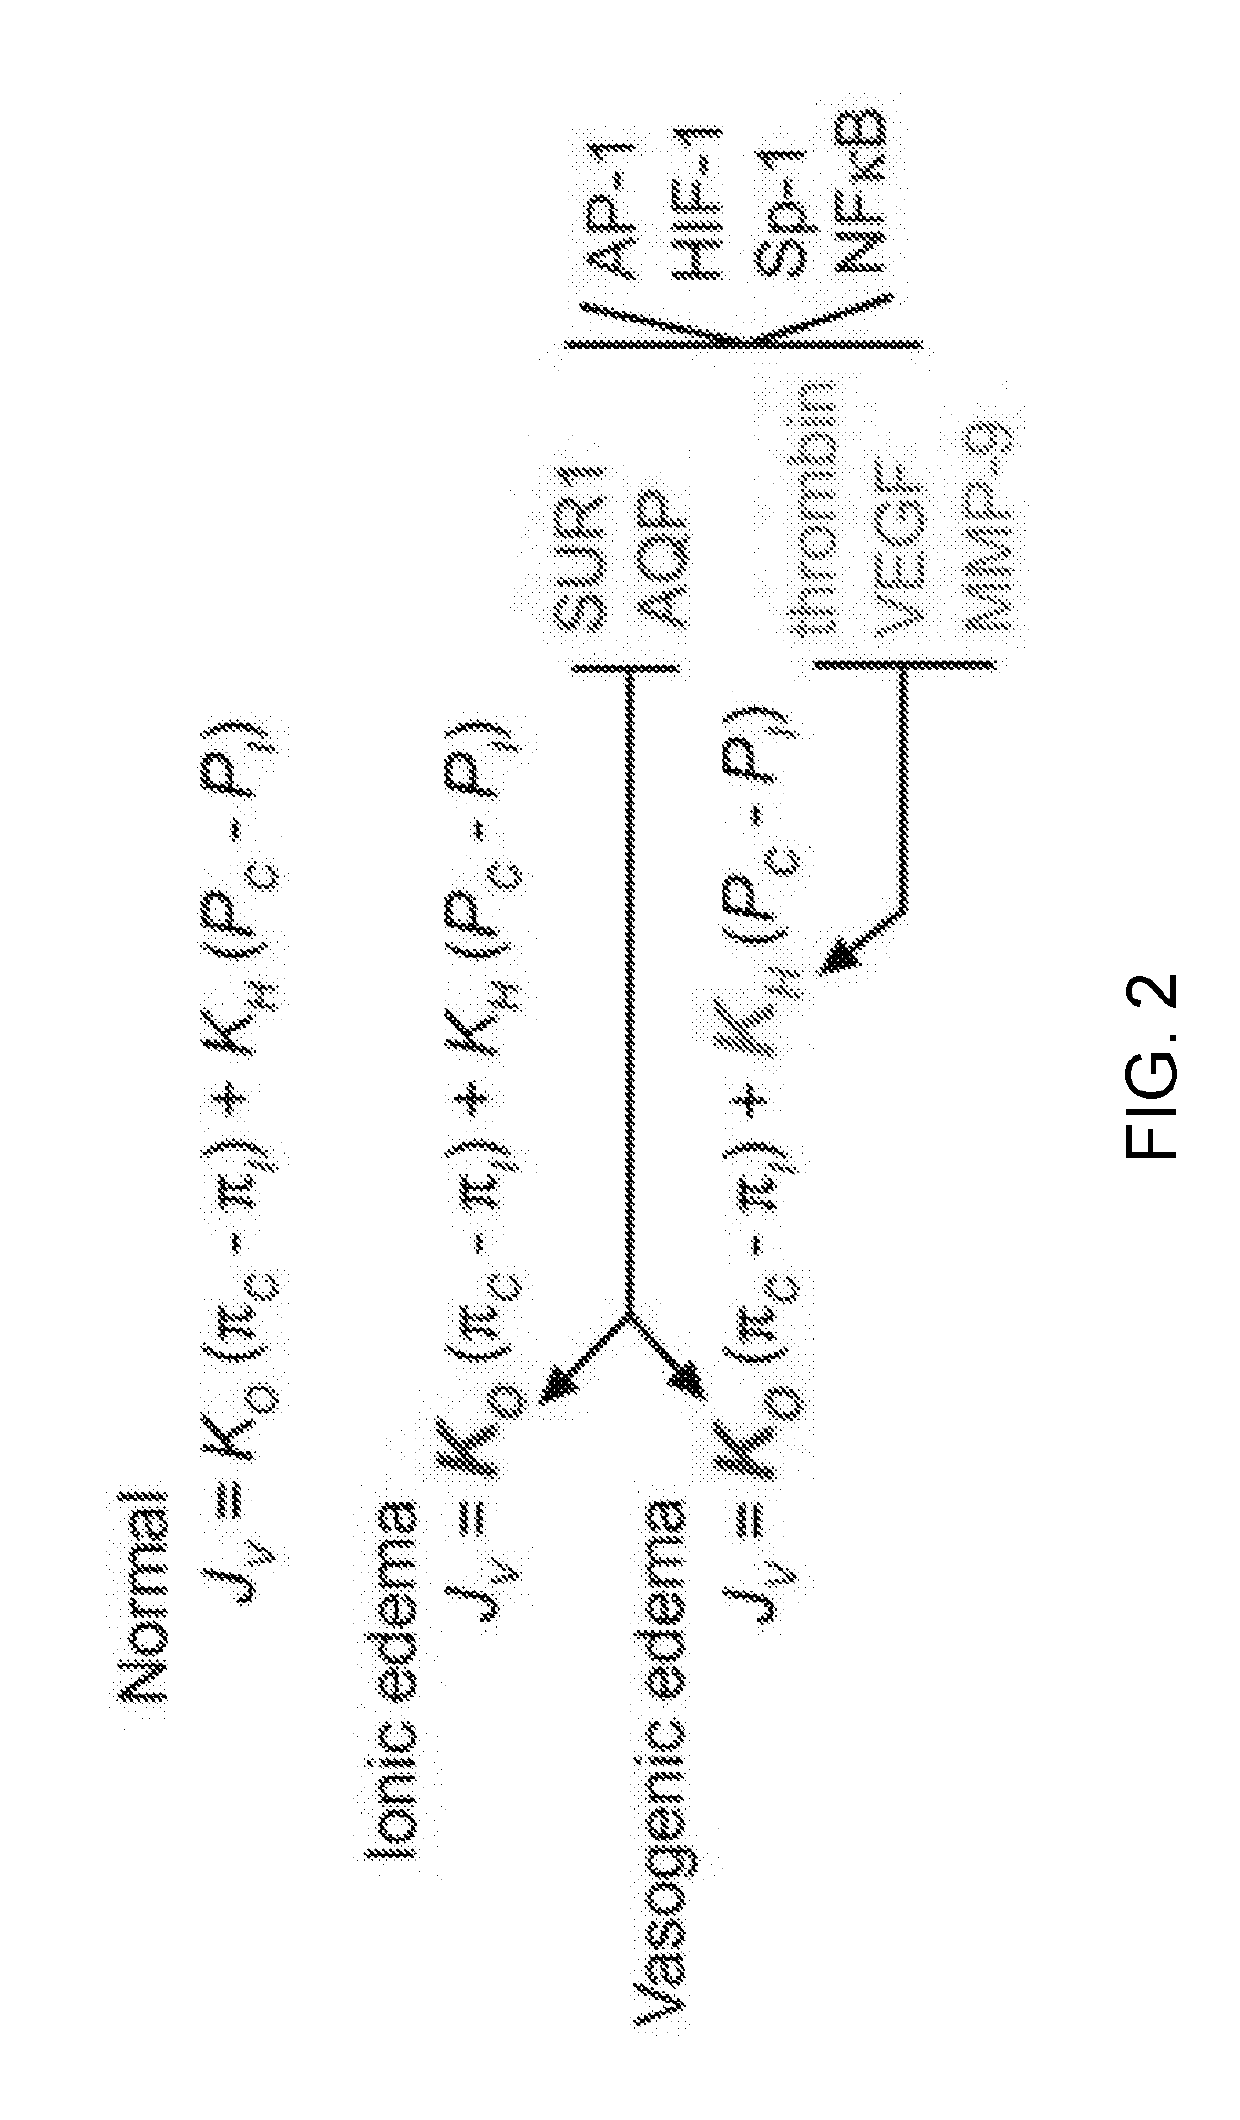 Methods for antagonists of a non-selective cation channel in neural cells